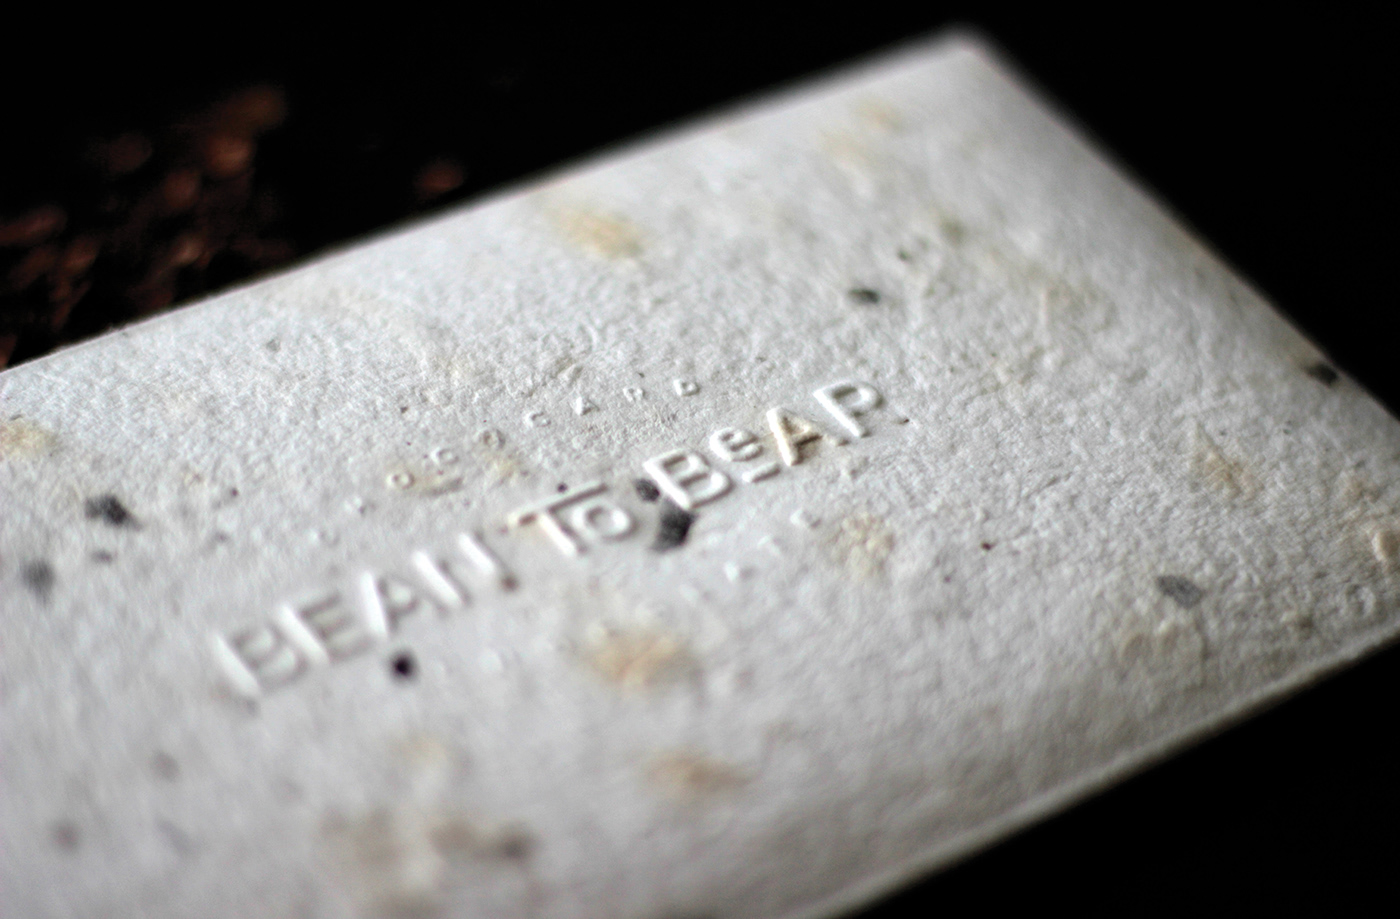 chocolate package moulded paper handcraft RECYCLED identity bean-to-bar environmentally friendly